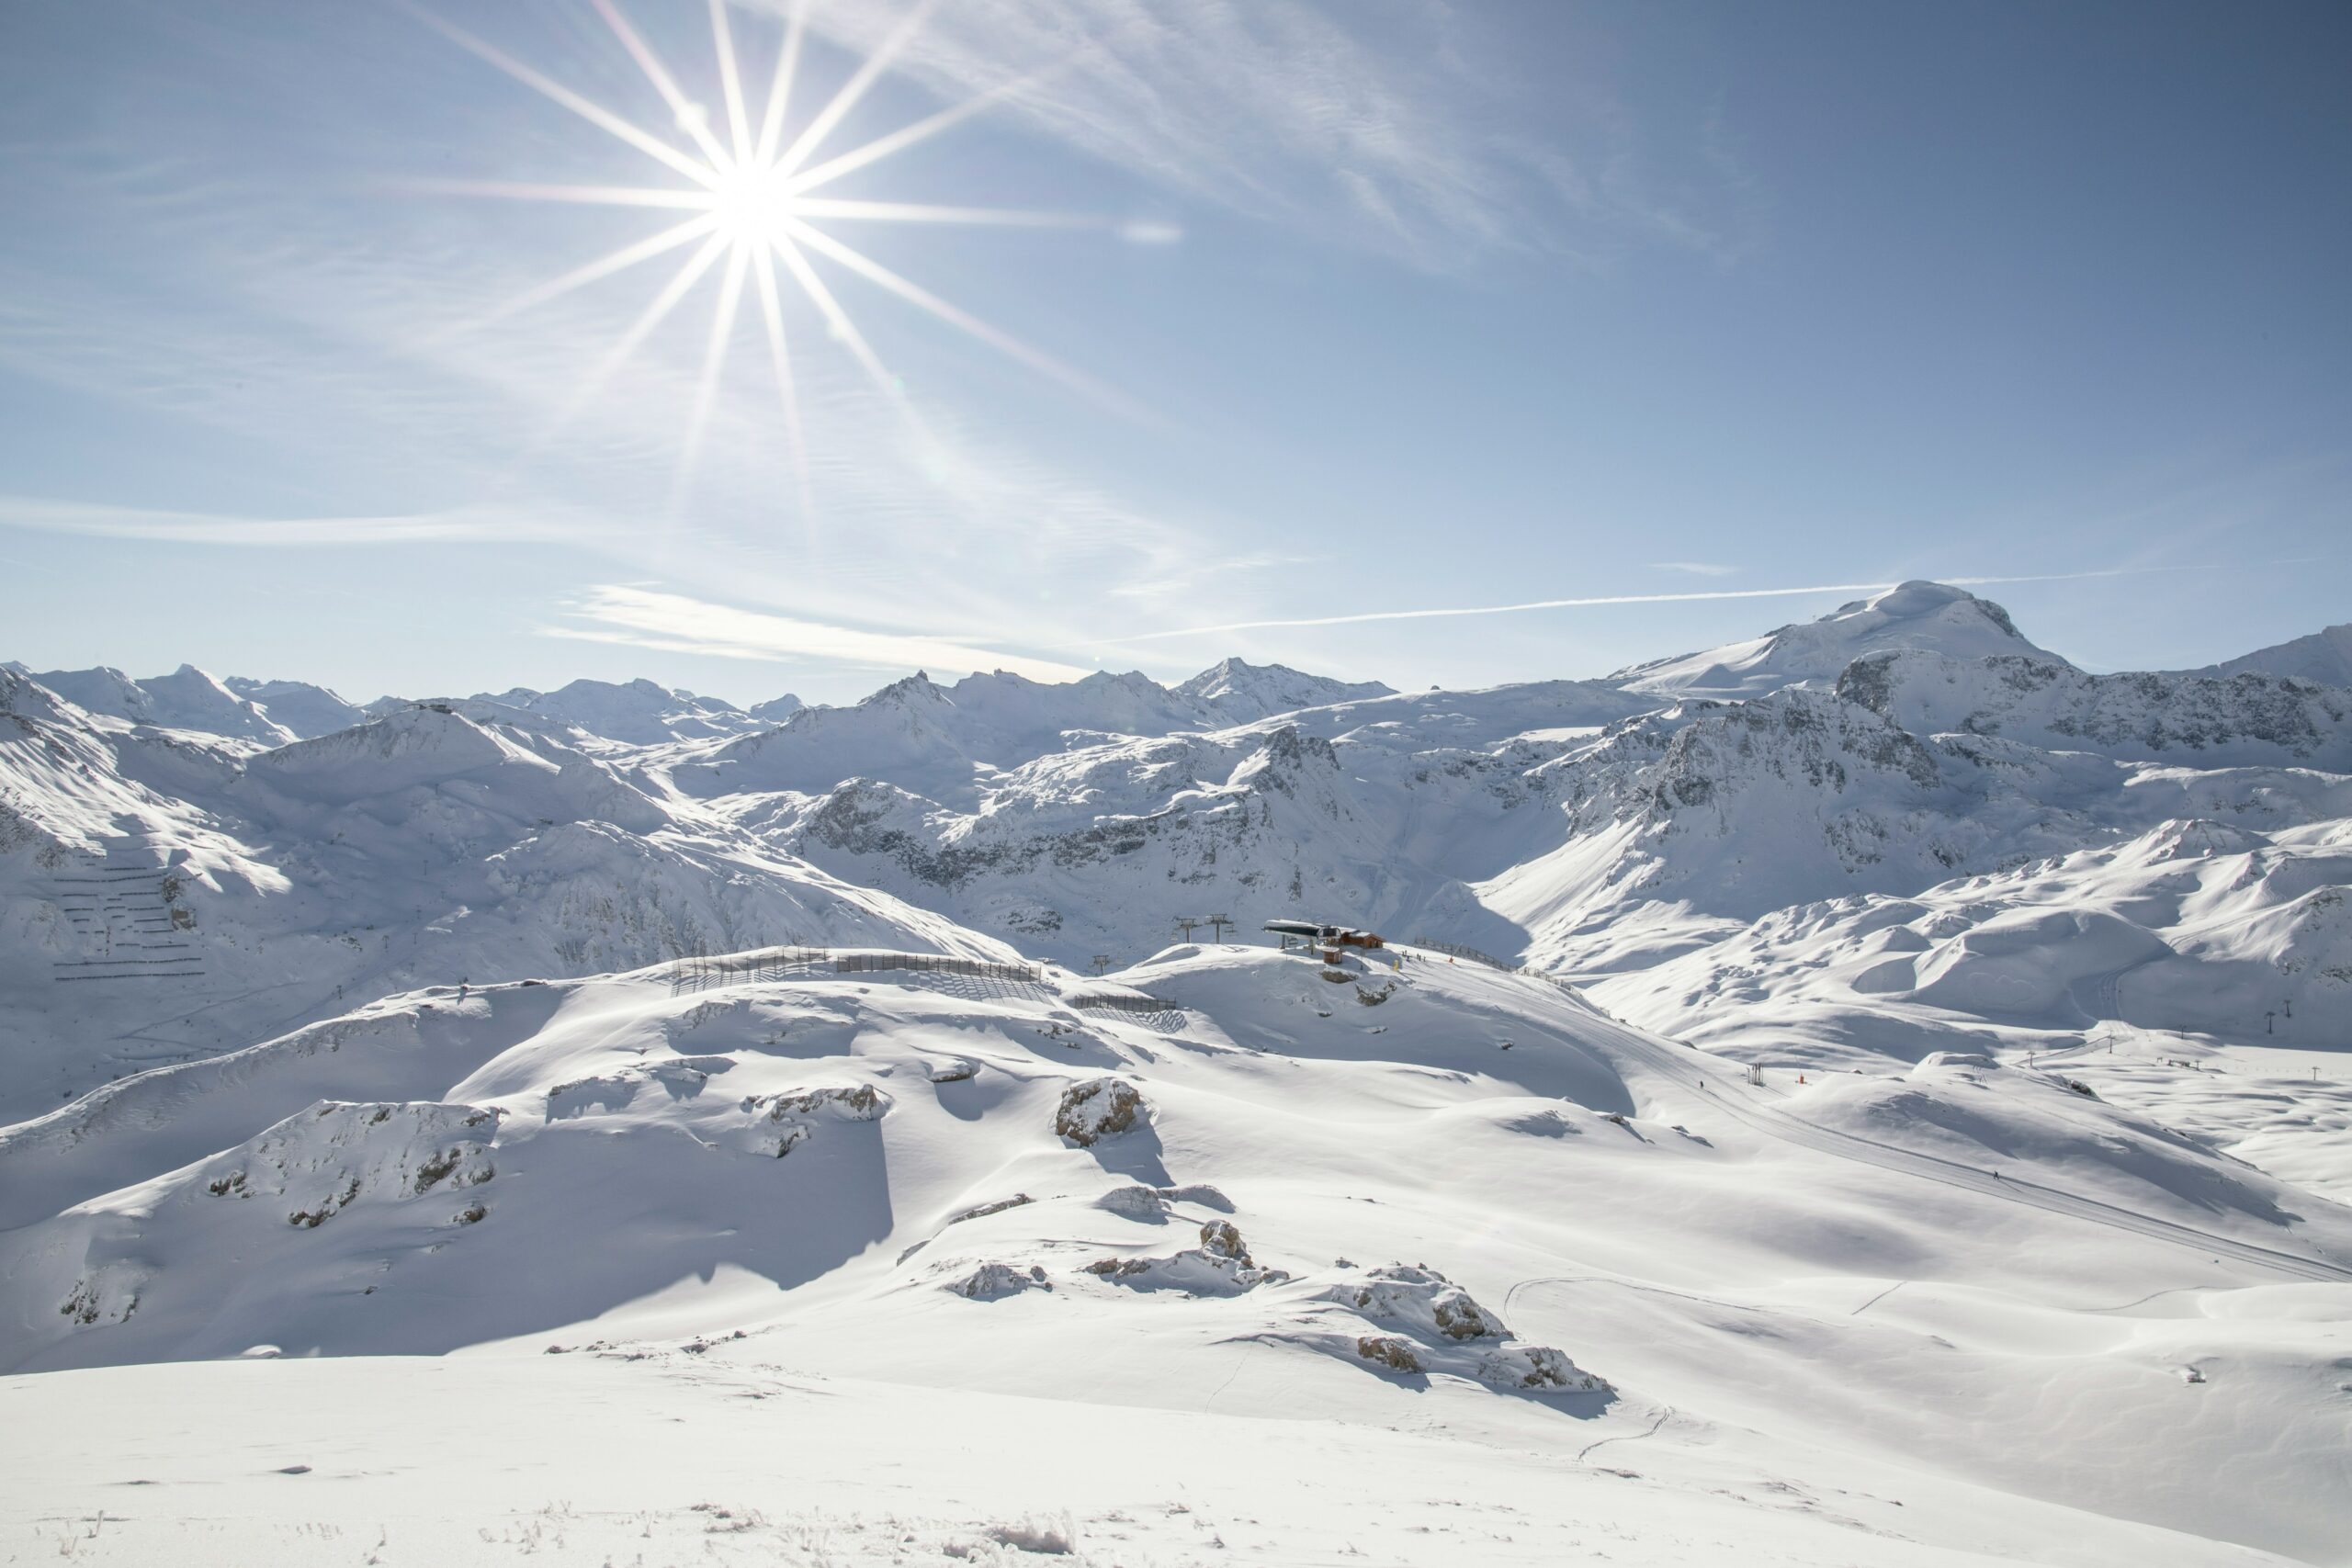 10 resorts for late season skiing in April in Europe